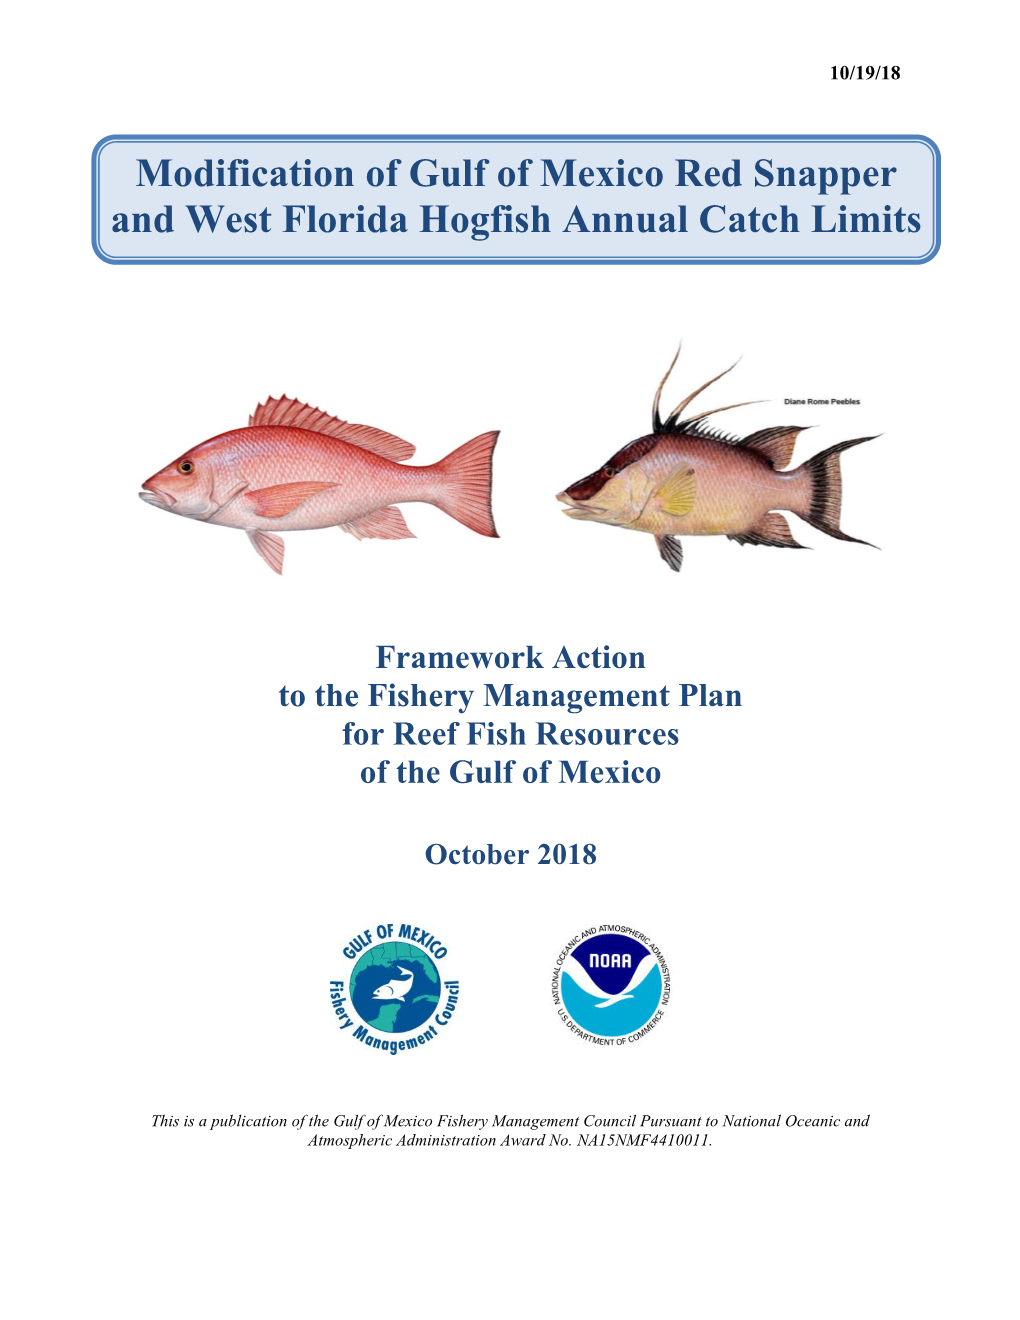 Modification of Gulf of Mexico Red Snapper and West Florida Hogfish Annual Catch Limits